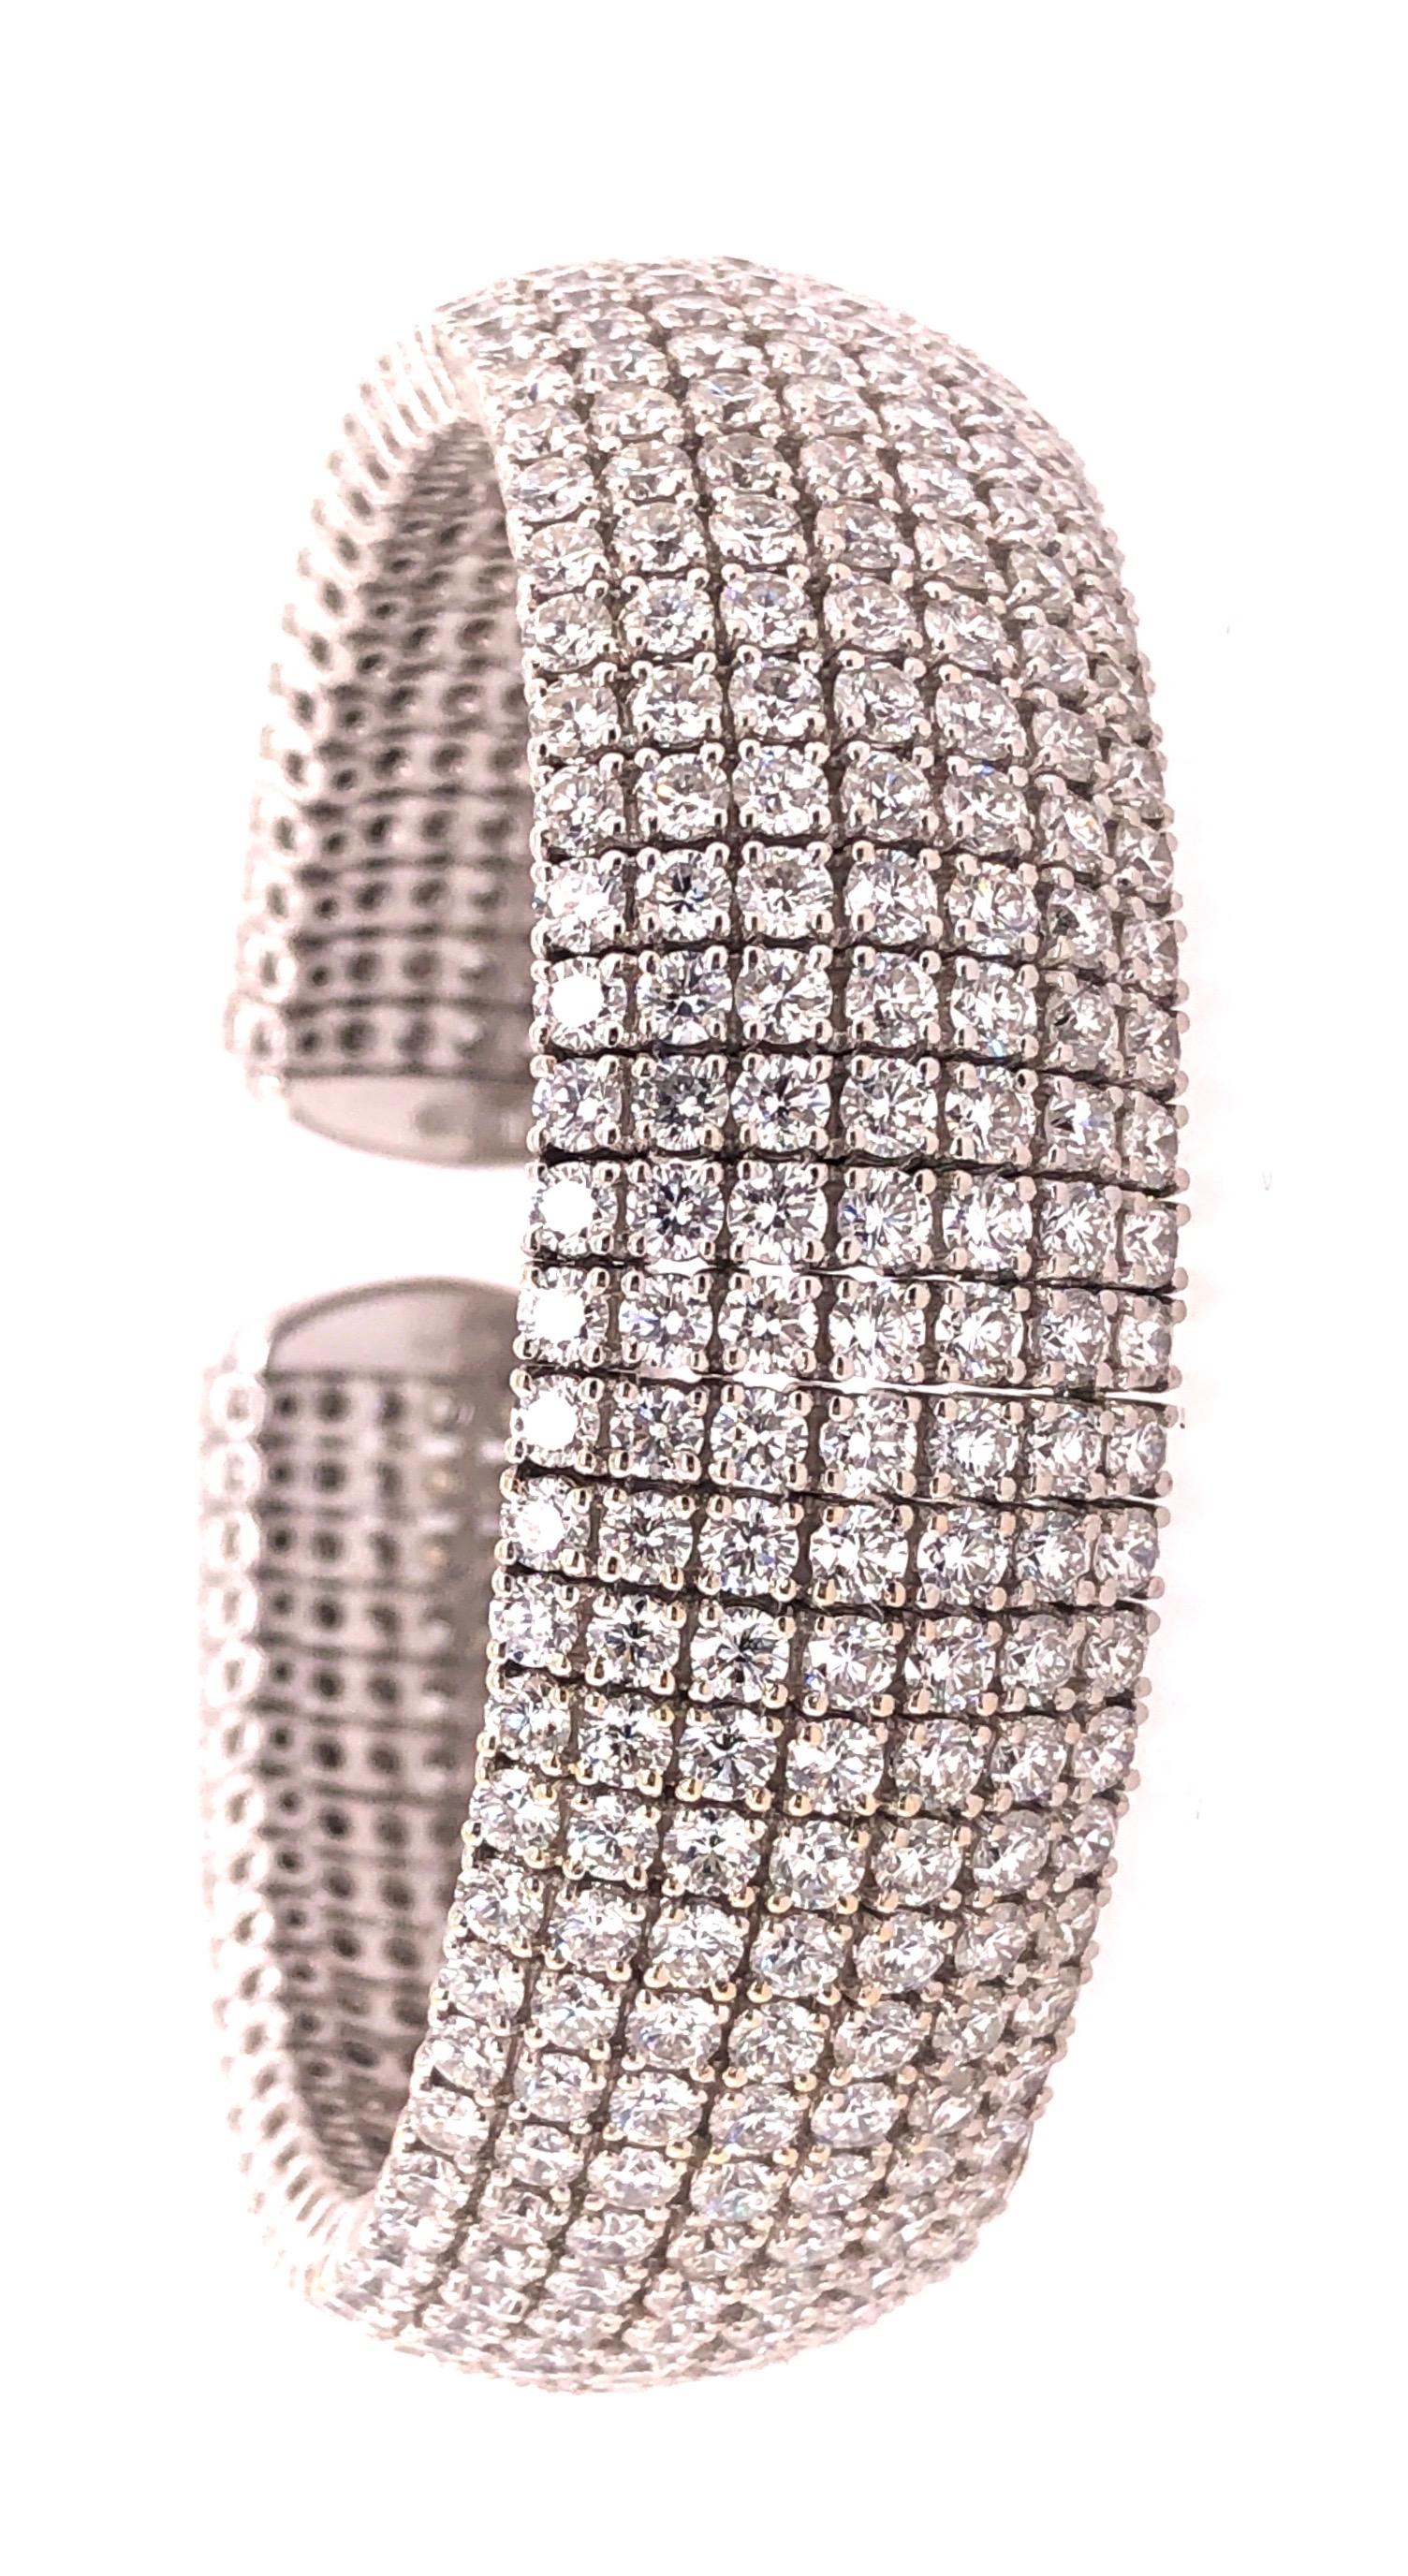 18 Karat White Gold and Diamond Cuff Bracelet Weighing Approx 32.89 Carat For Sale 1